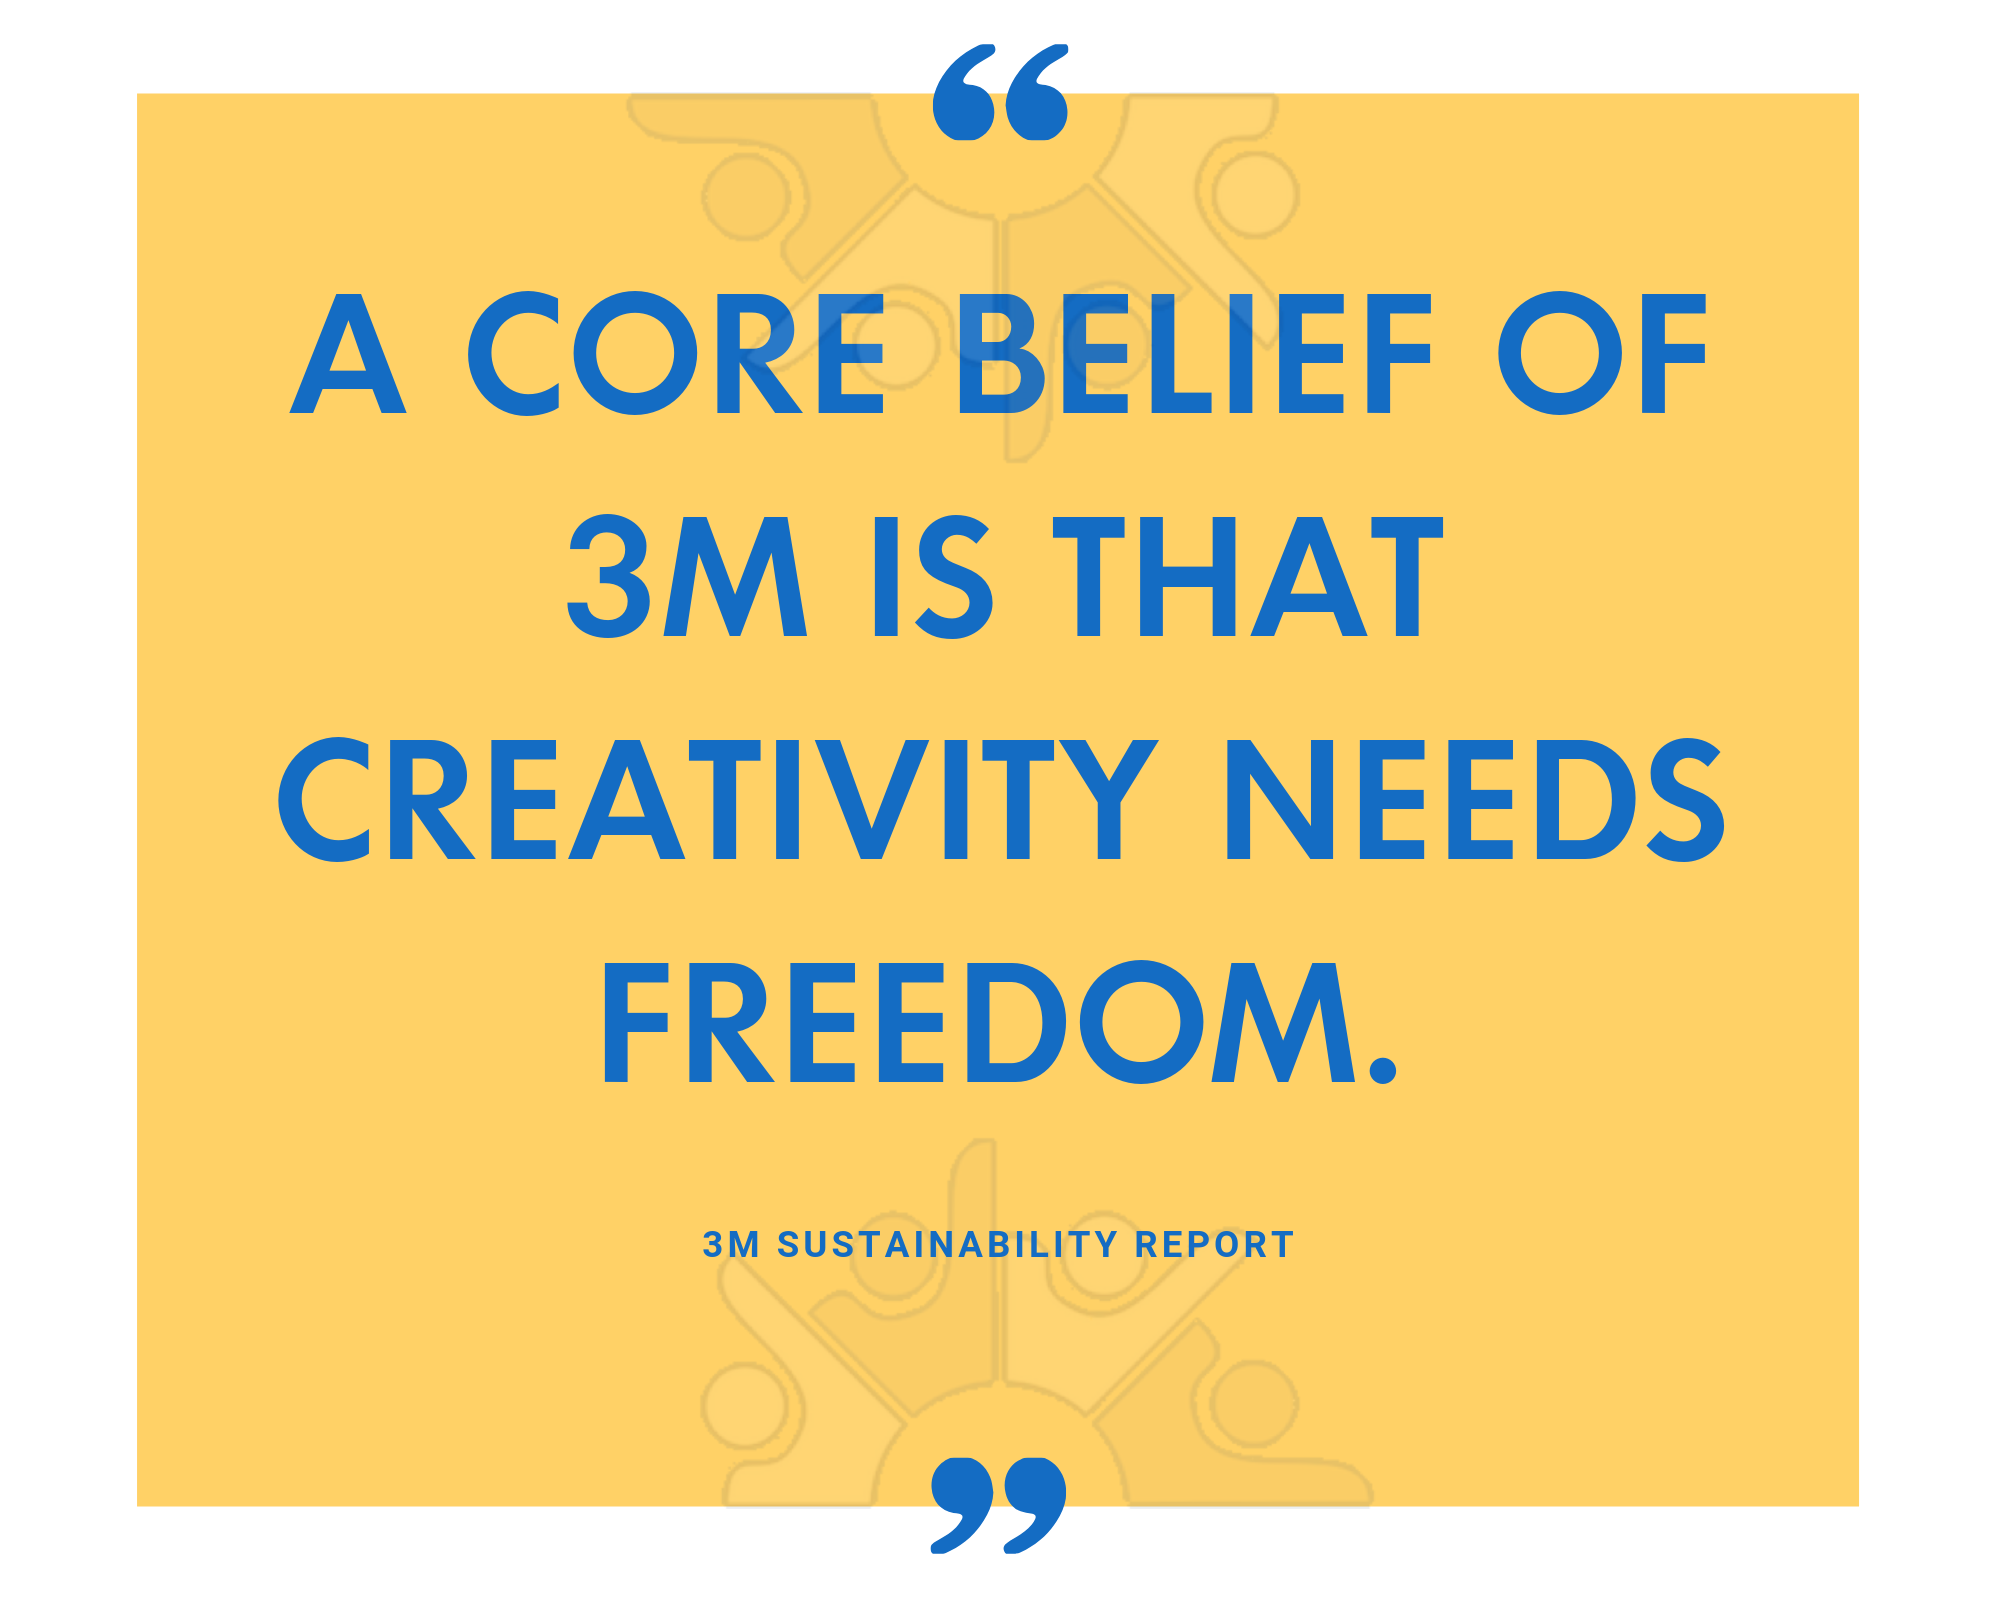 A core belief of 3M is that creativity needs freedom.